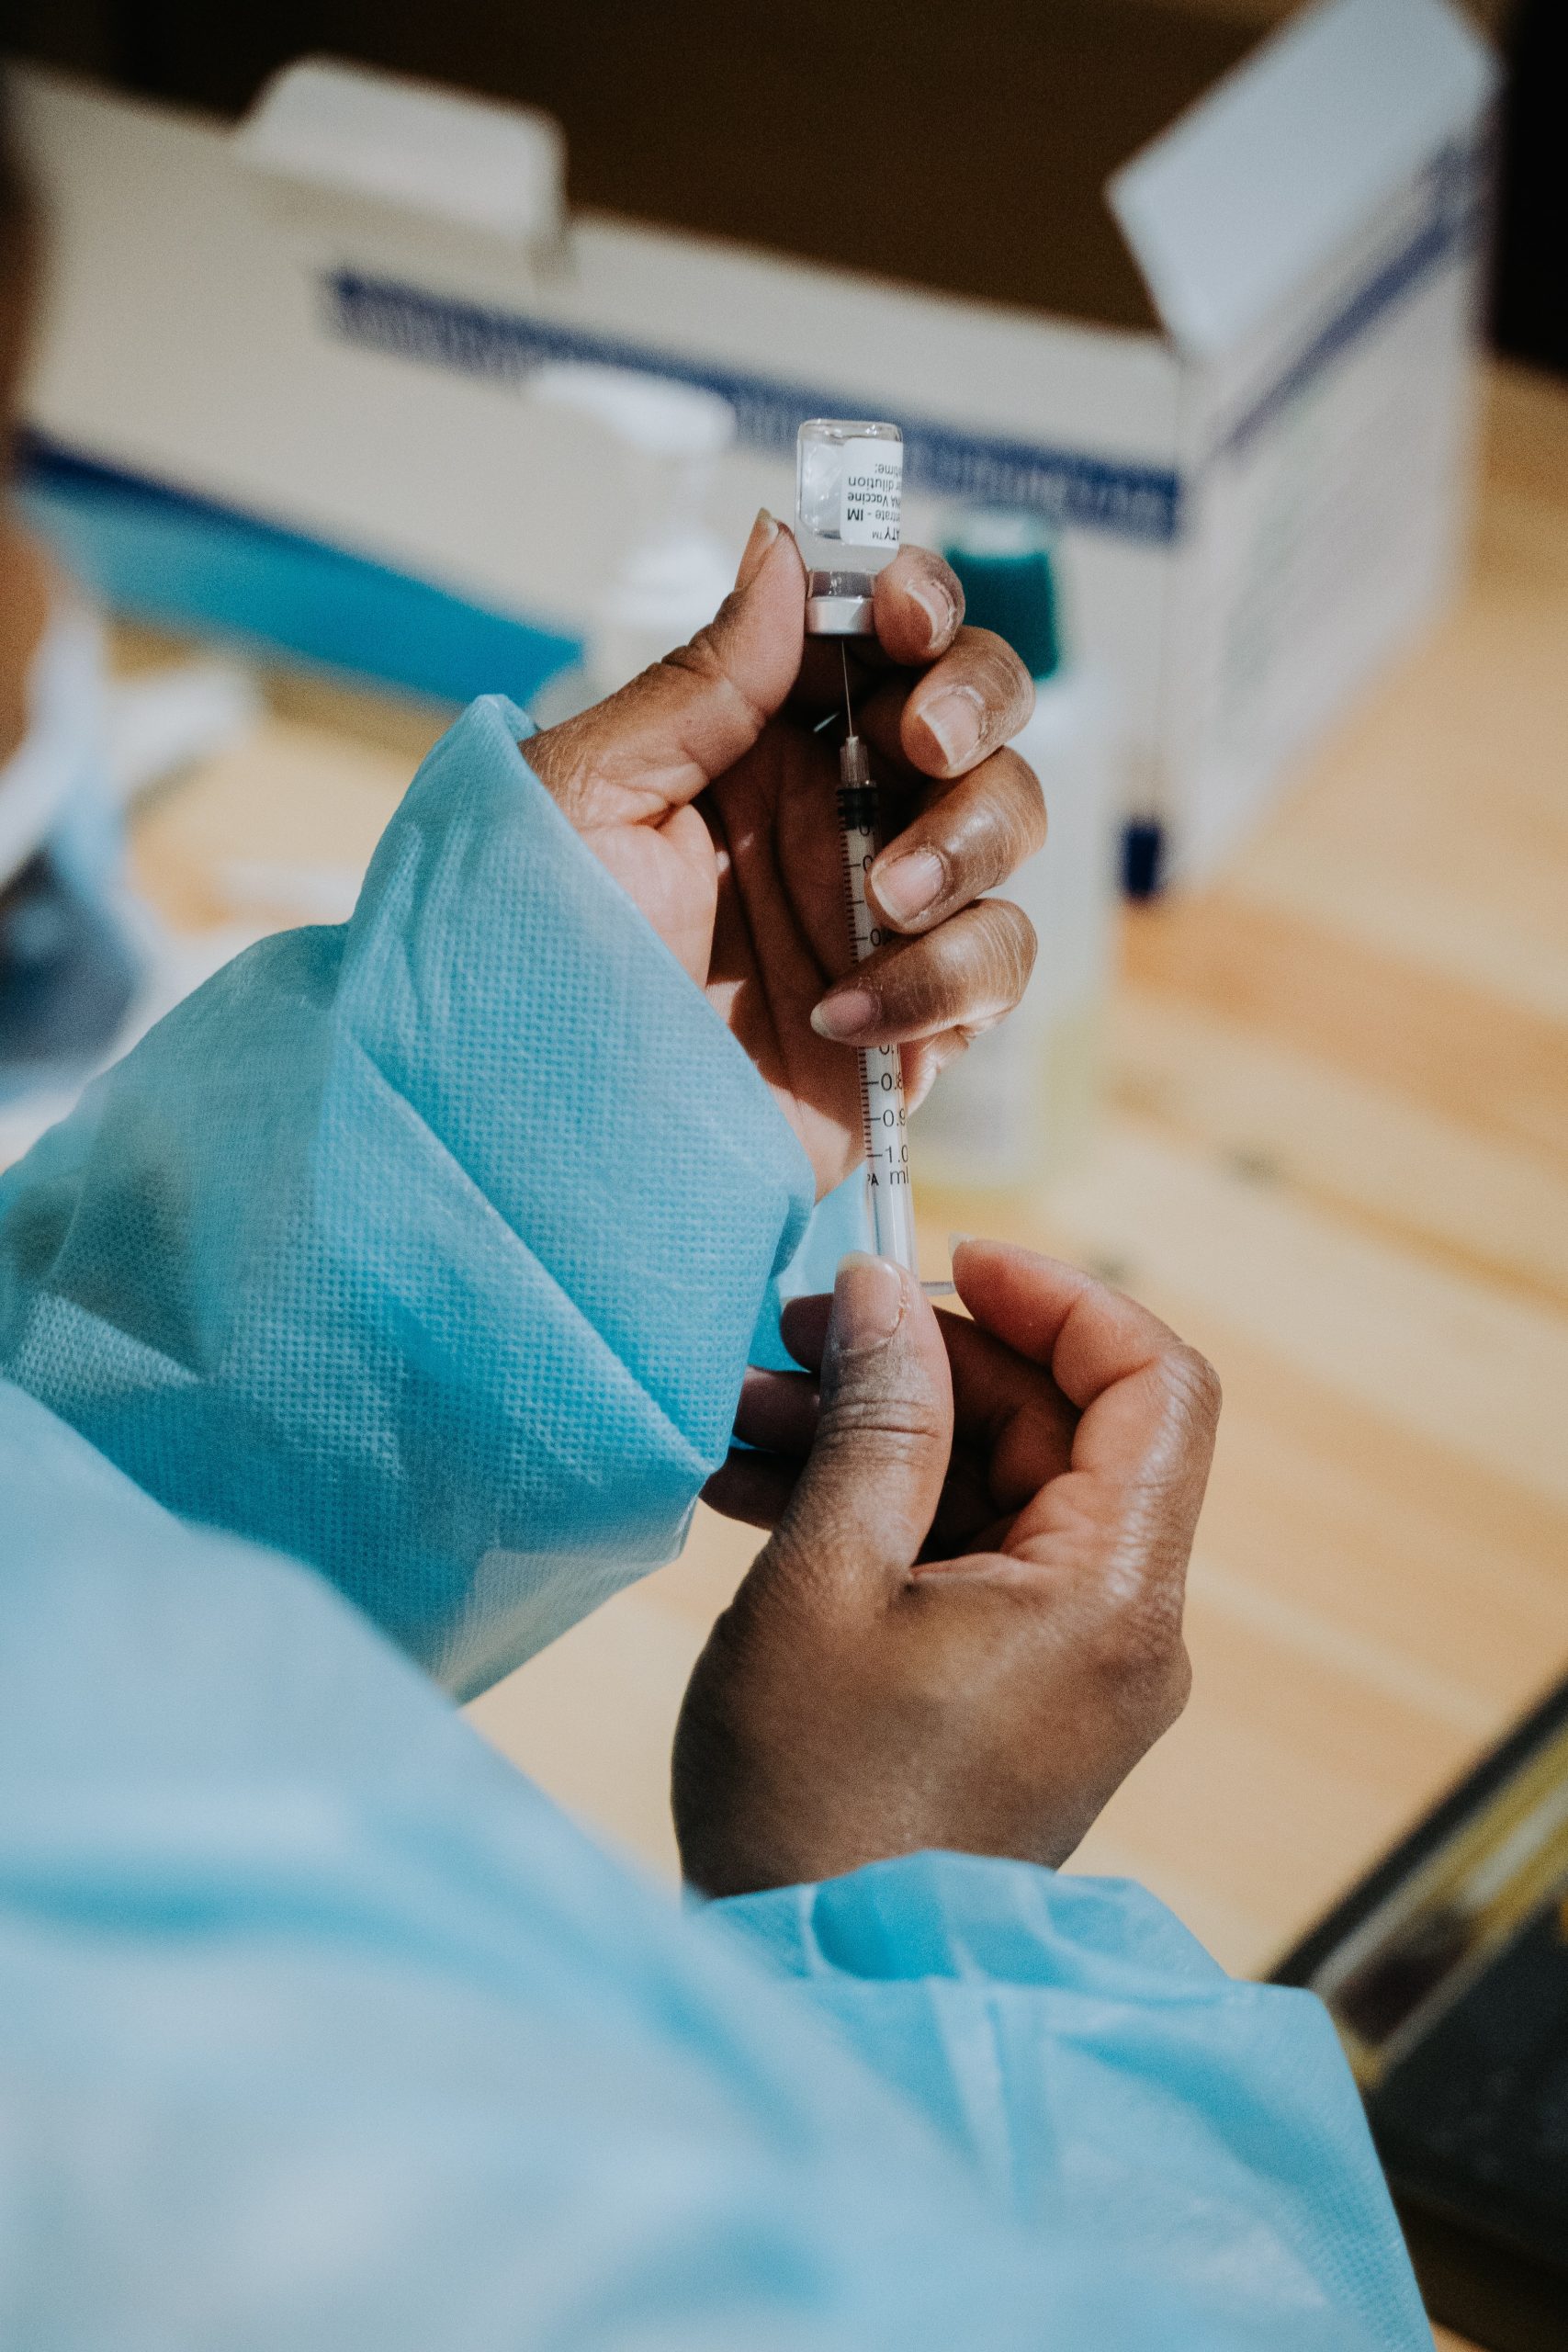 COVID-19 Vaccine Hesitancy Is Dangerous, but for the Black Global Community It Is Rooted in Medical Racism and Violence